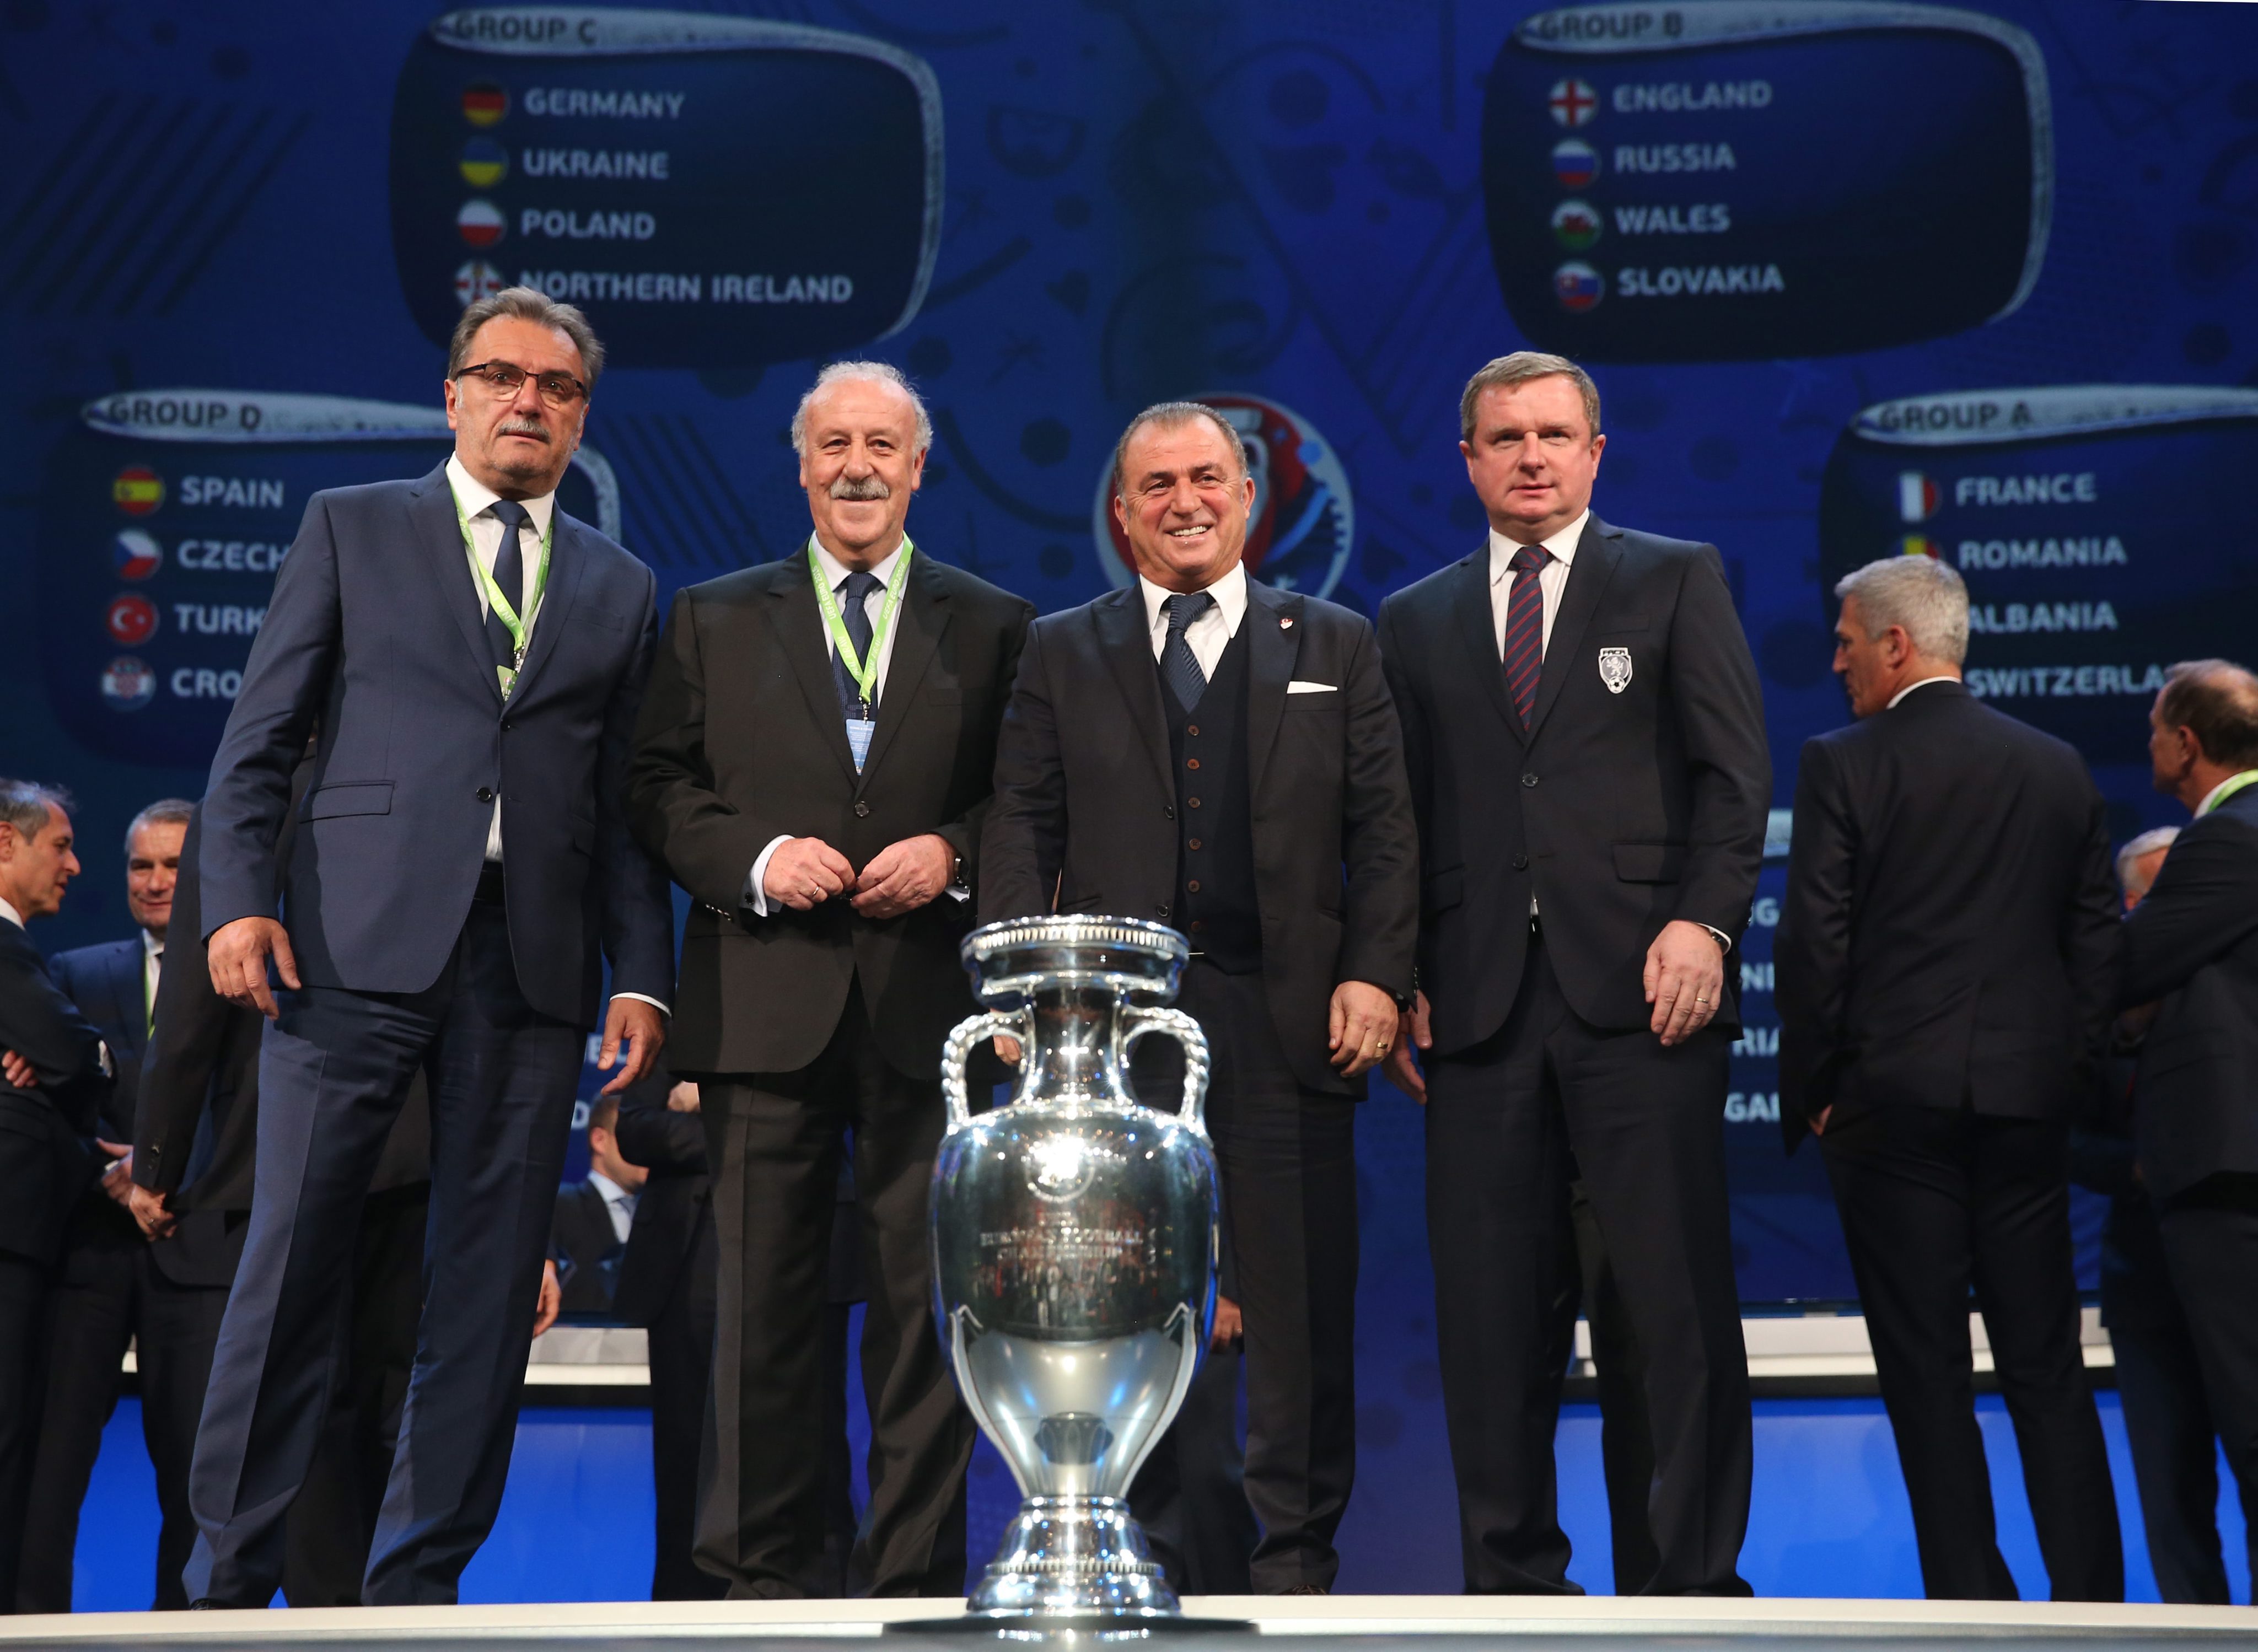 epa05066773 Croatia national soccer team coach Ante Cacic (L-R), Spain national soccer team coach Vicente del Bosque,  Turkey national soccer team coach Fatih Terim, Czech national soccer team coach Pavel Vrba react during the UEFA EURO 2016 final draw ceremony at the Palais des Congres in Paris, France, 12 December 2015. The UEFA EURO 2016 soccer championship will take place from 10 June to 10 July 2016 in France. The four teams will play in Group C.  EPA/CHRISTIAN CHARISIUS